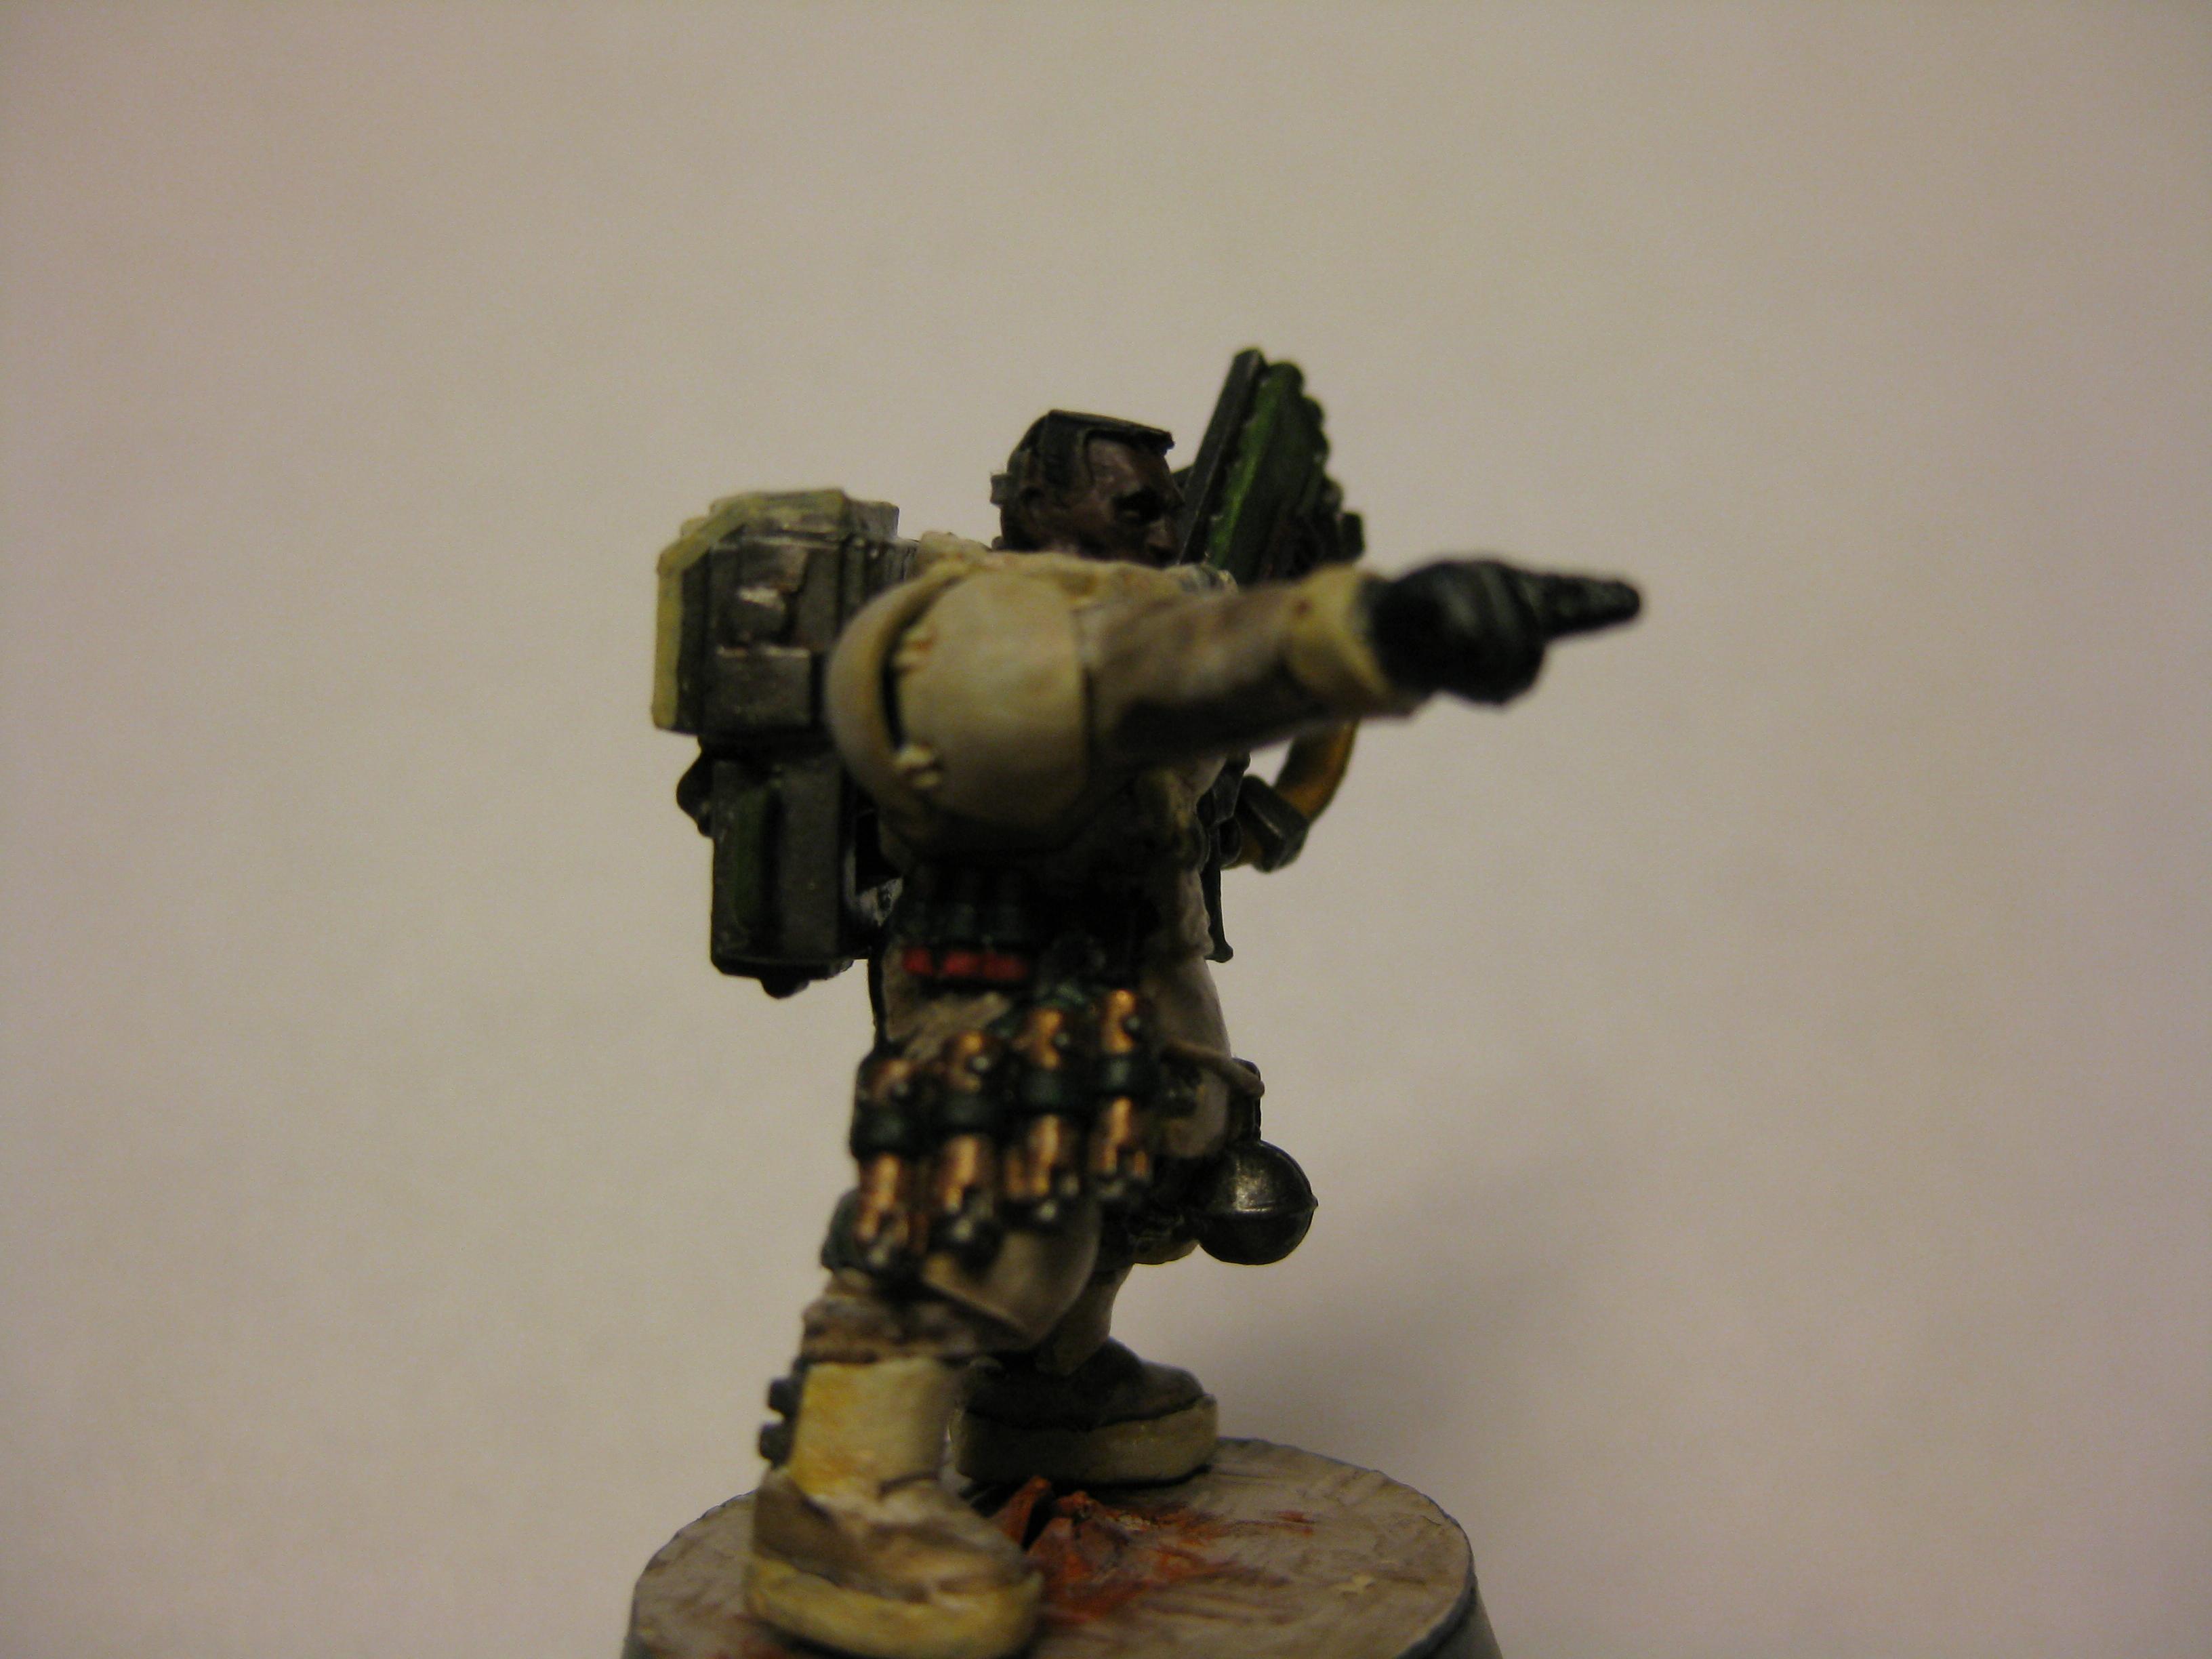 Side shot. The kroot "grenades" are visible